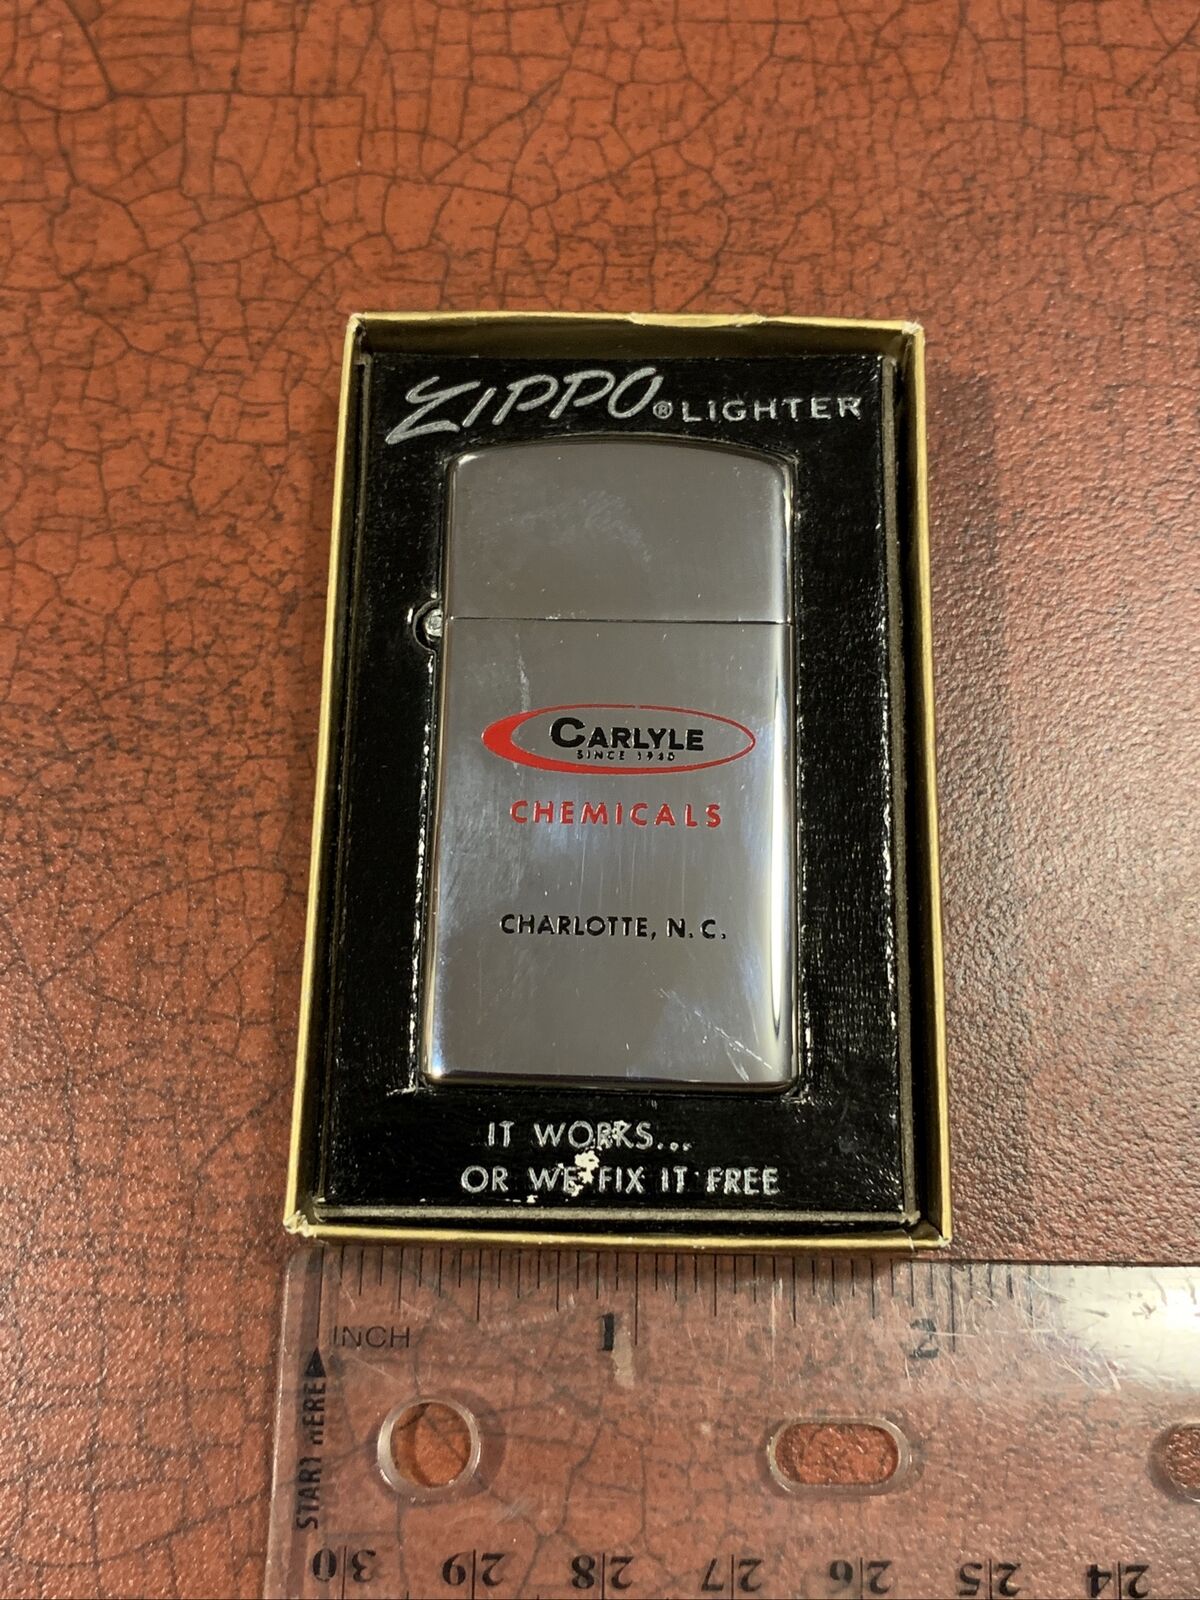 Vintage 1970’s New In Box Zippo Lighter Carlyle Chemicals Charlotte N.C. Rare